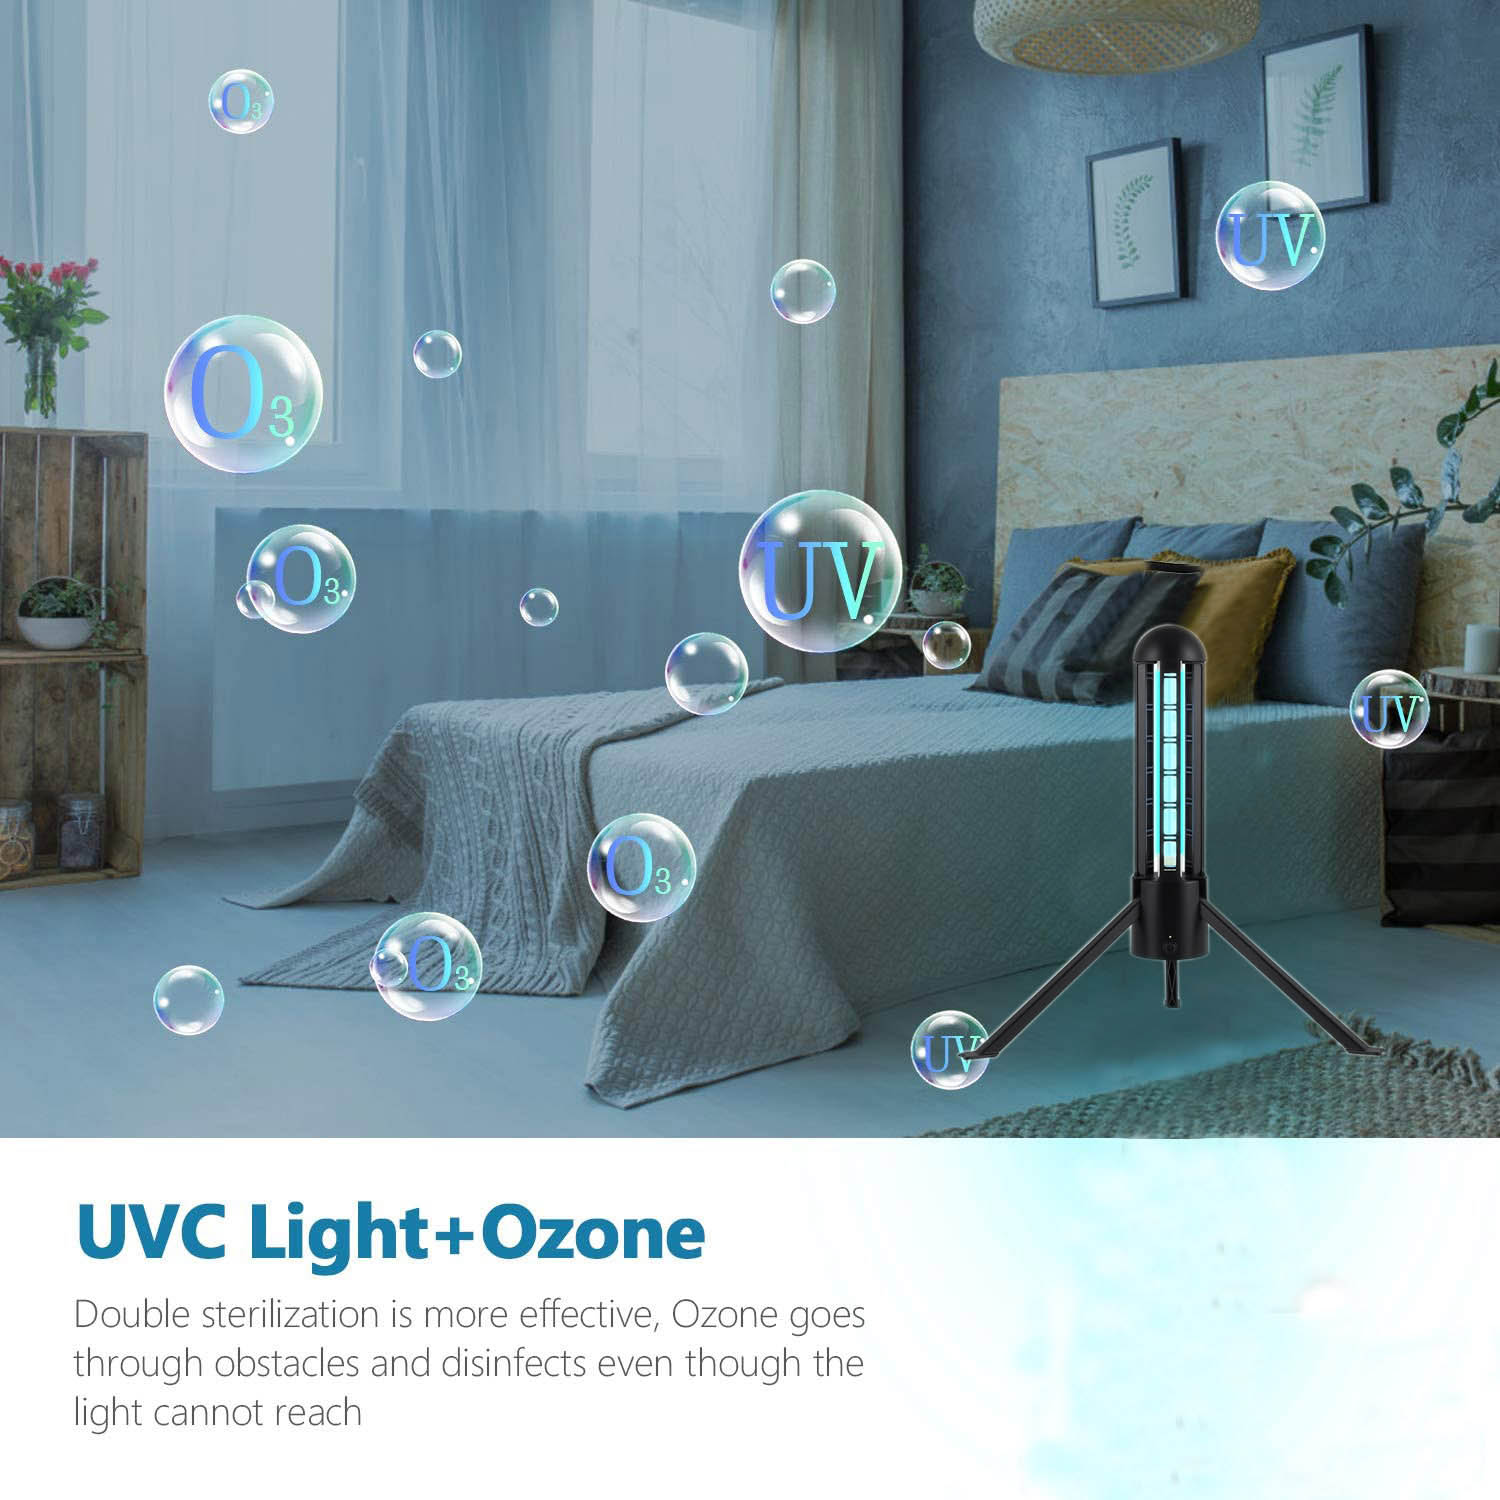 Disinfection Germicidal UVC Lamp with Ozone - 2 